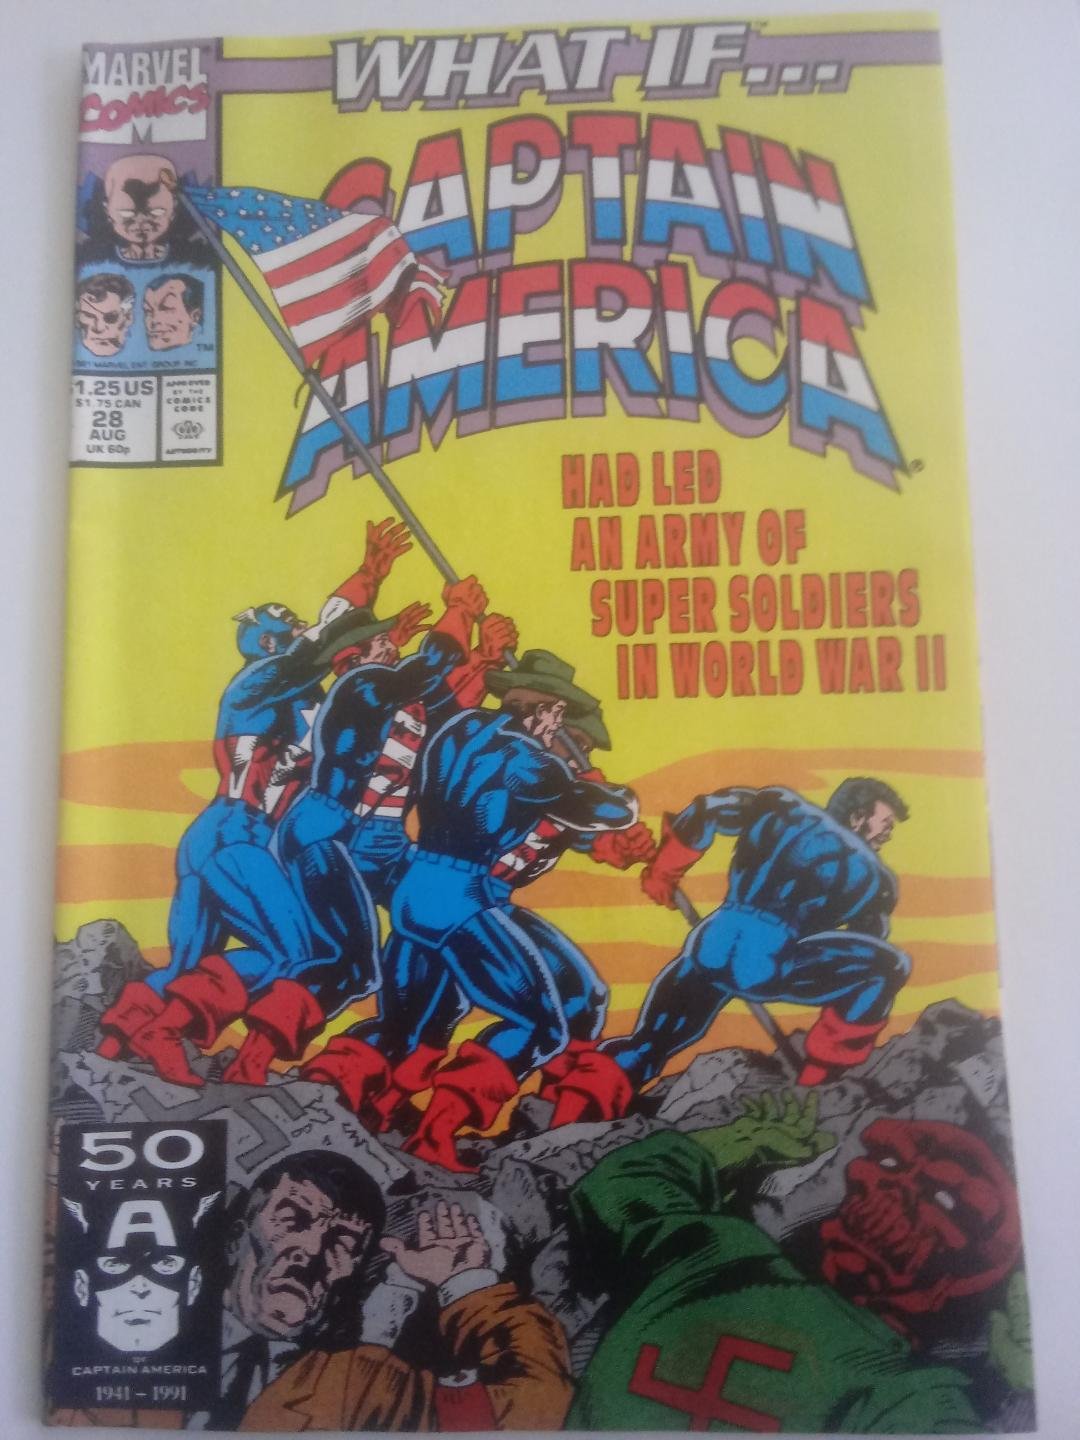 What if?28 Captain America had led an army of super soldiers in WW2